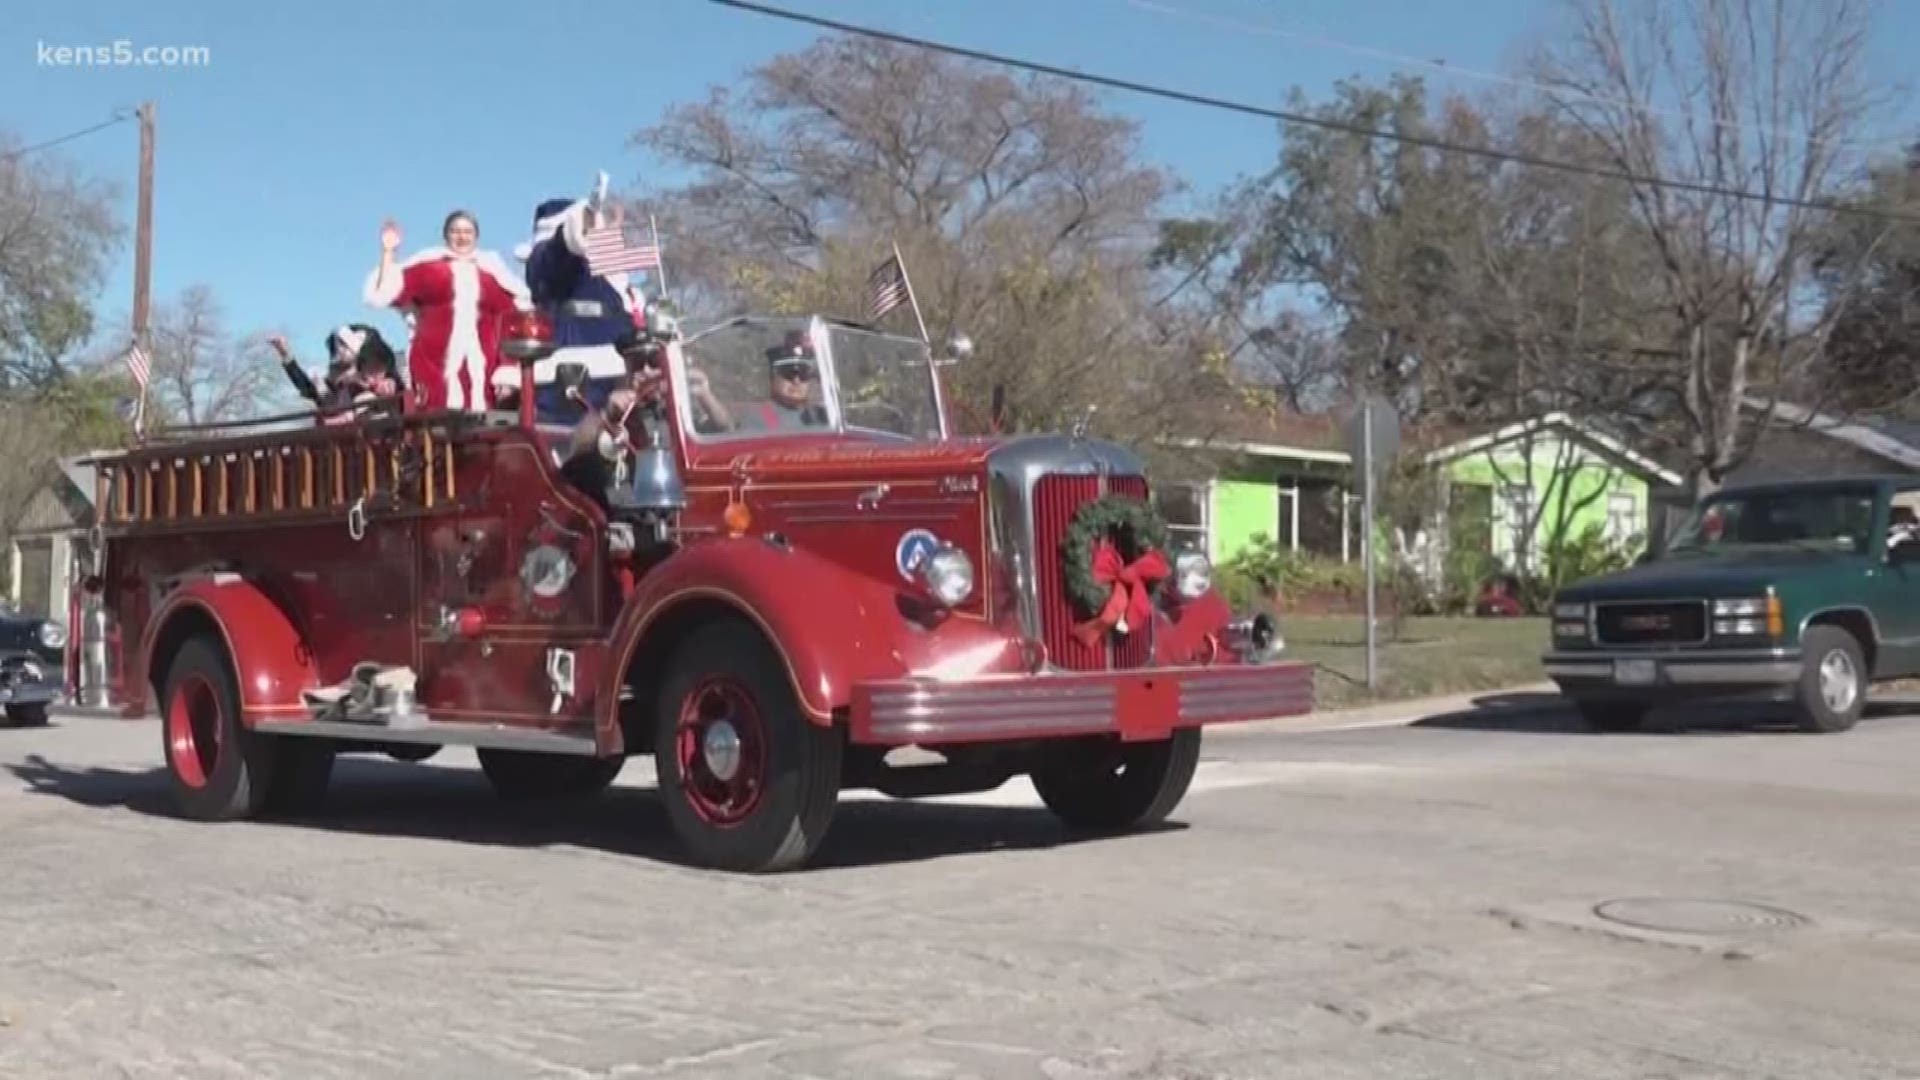 The 16th Annual Balcones Heights Blue Santa Parade made its way across town Saturday.